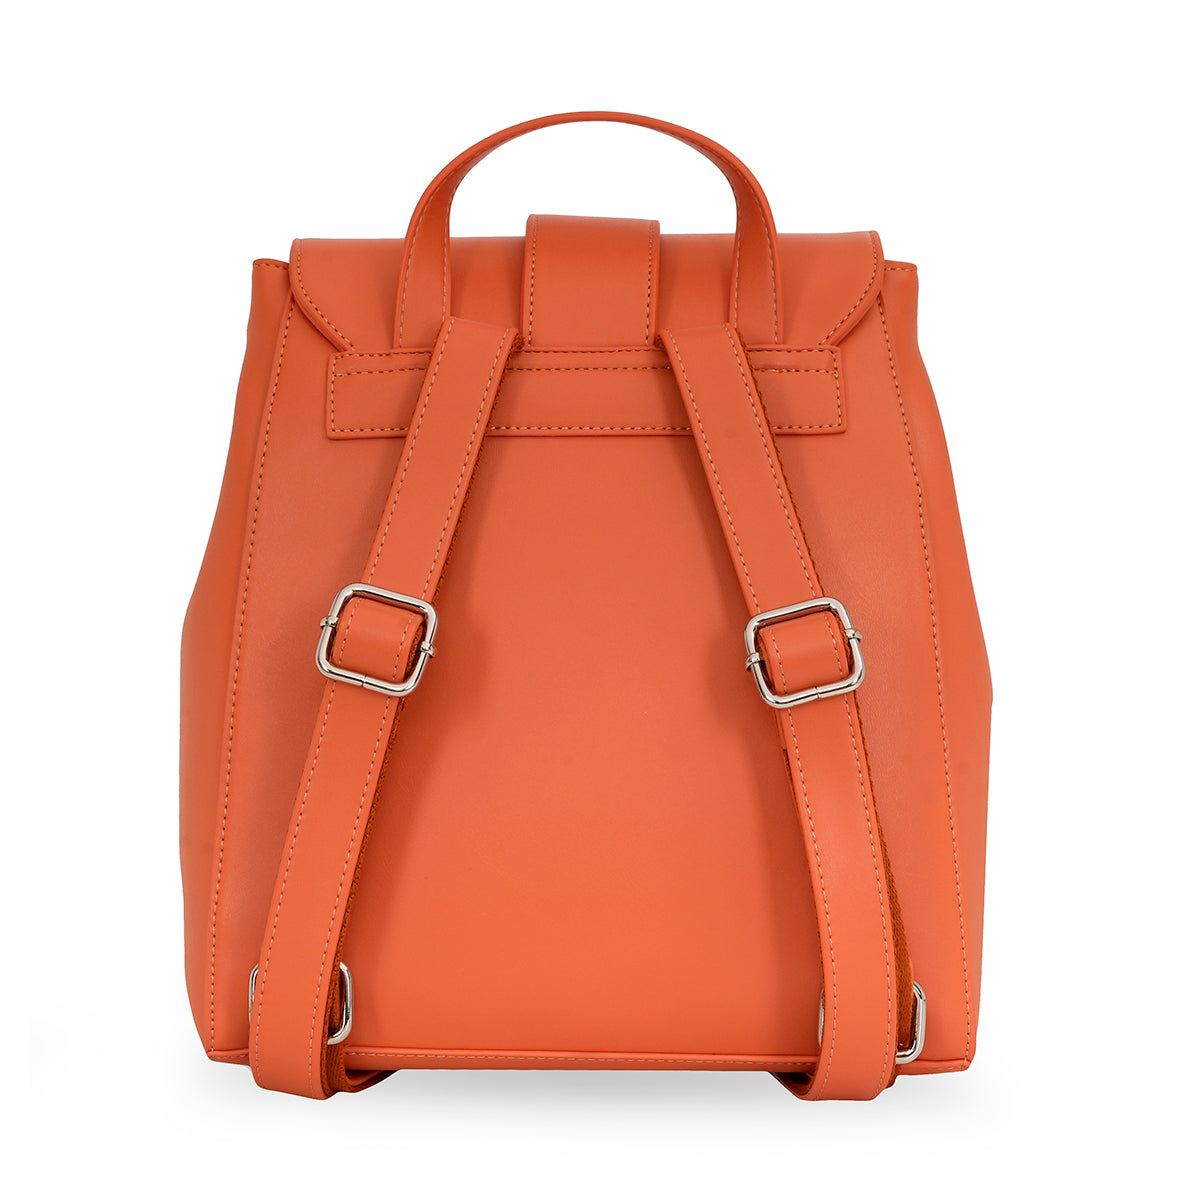 United Colors of Benetton Astrid Backpack Rust